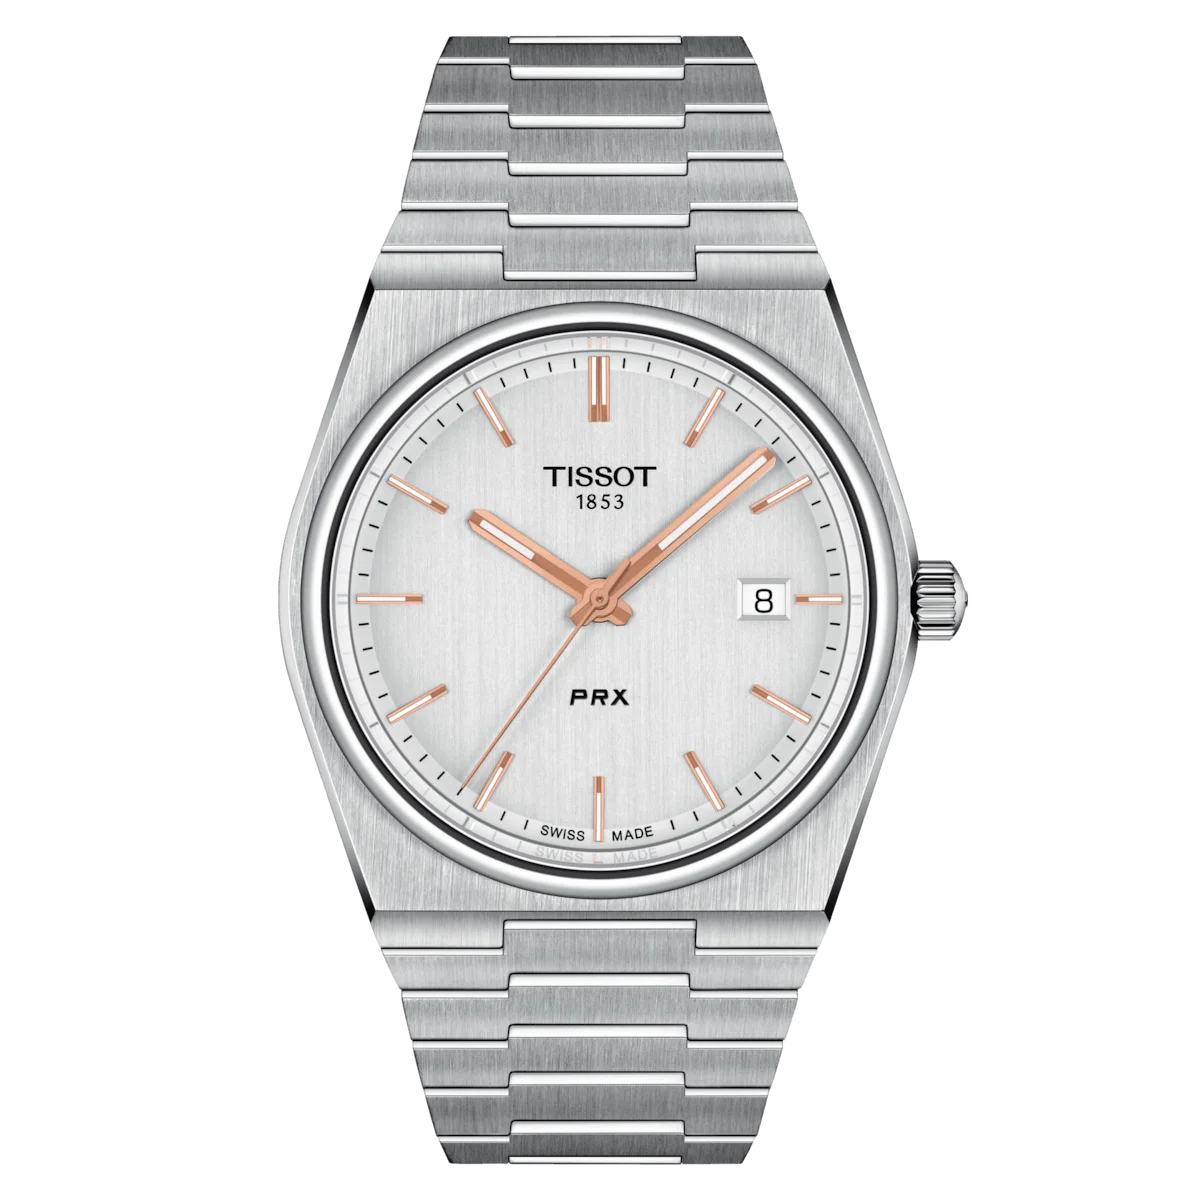 Tissot PRX Quartz T1344101103100 Silver Stainless Steel Rose Gold Index Batons with date function at 3 o'clock function. Front Image.